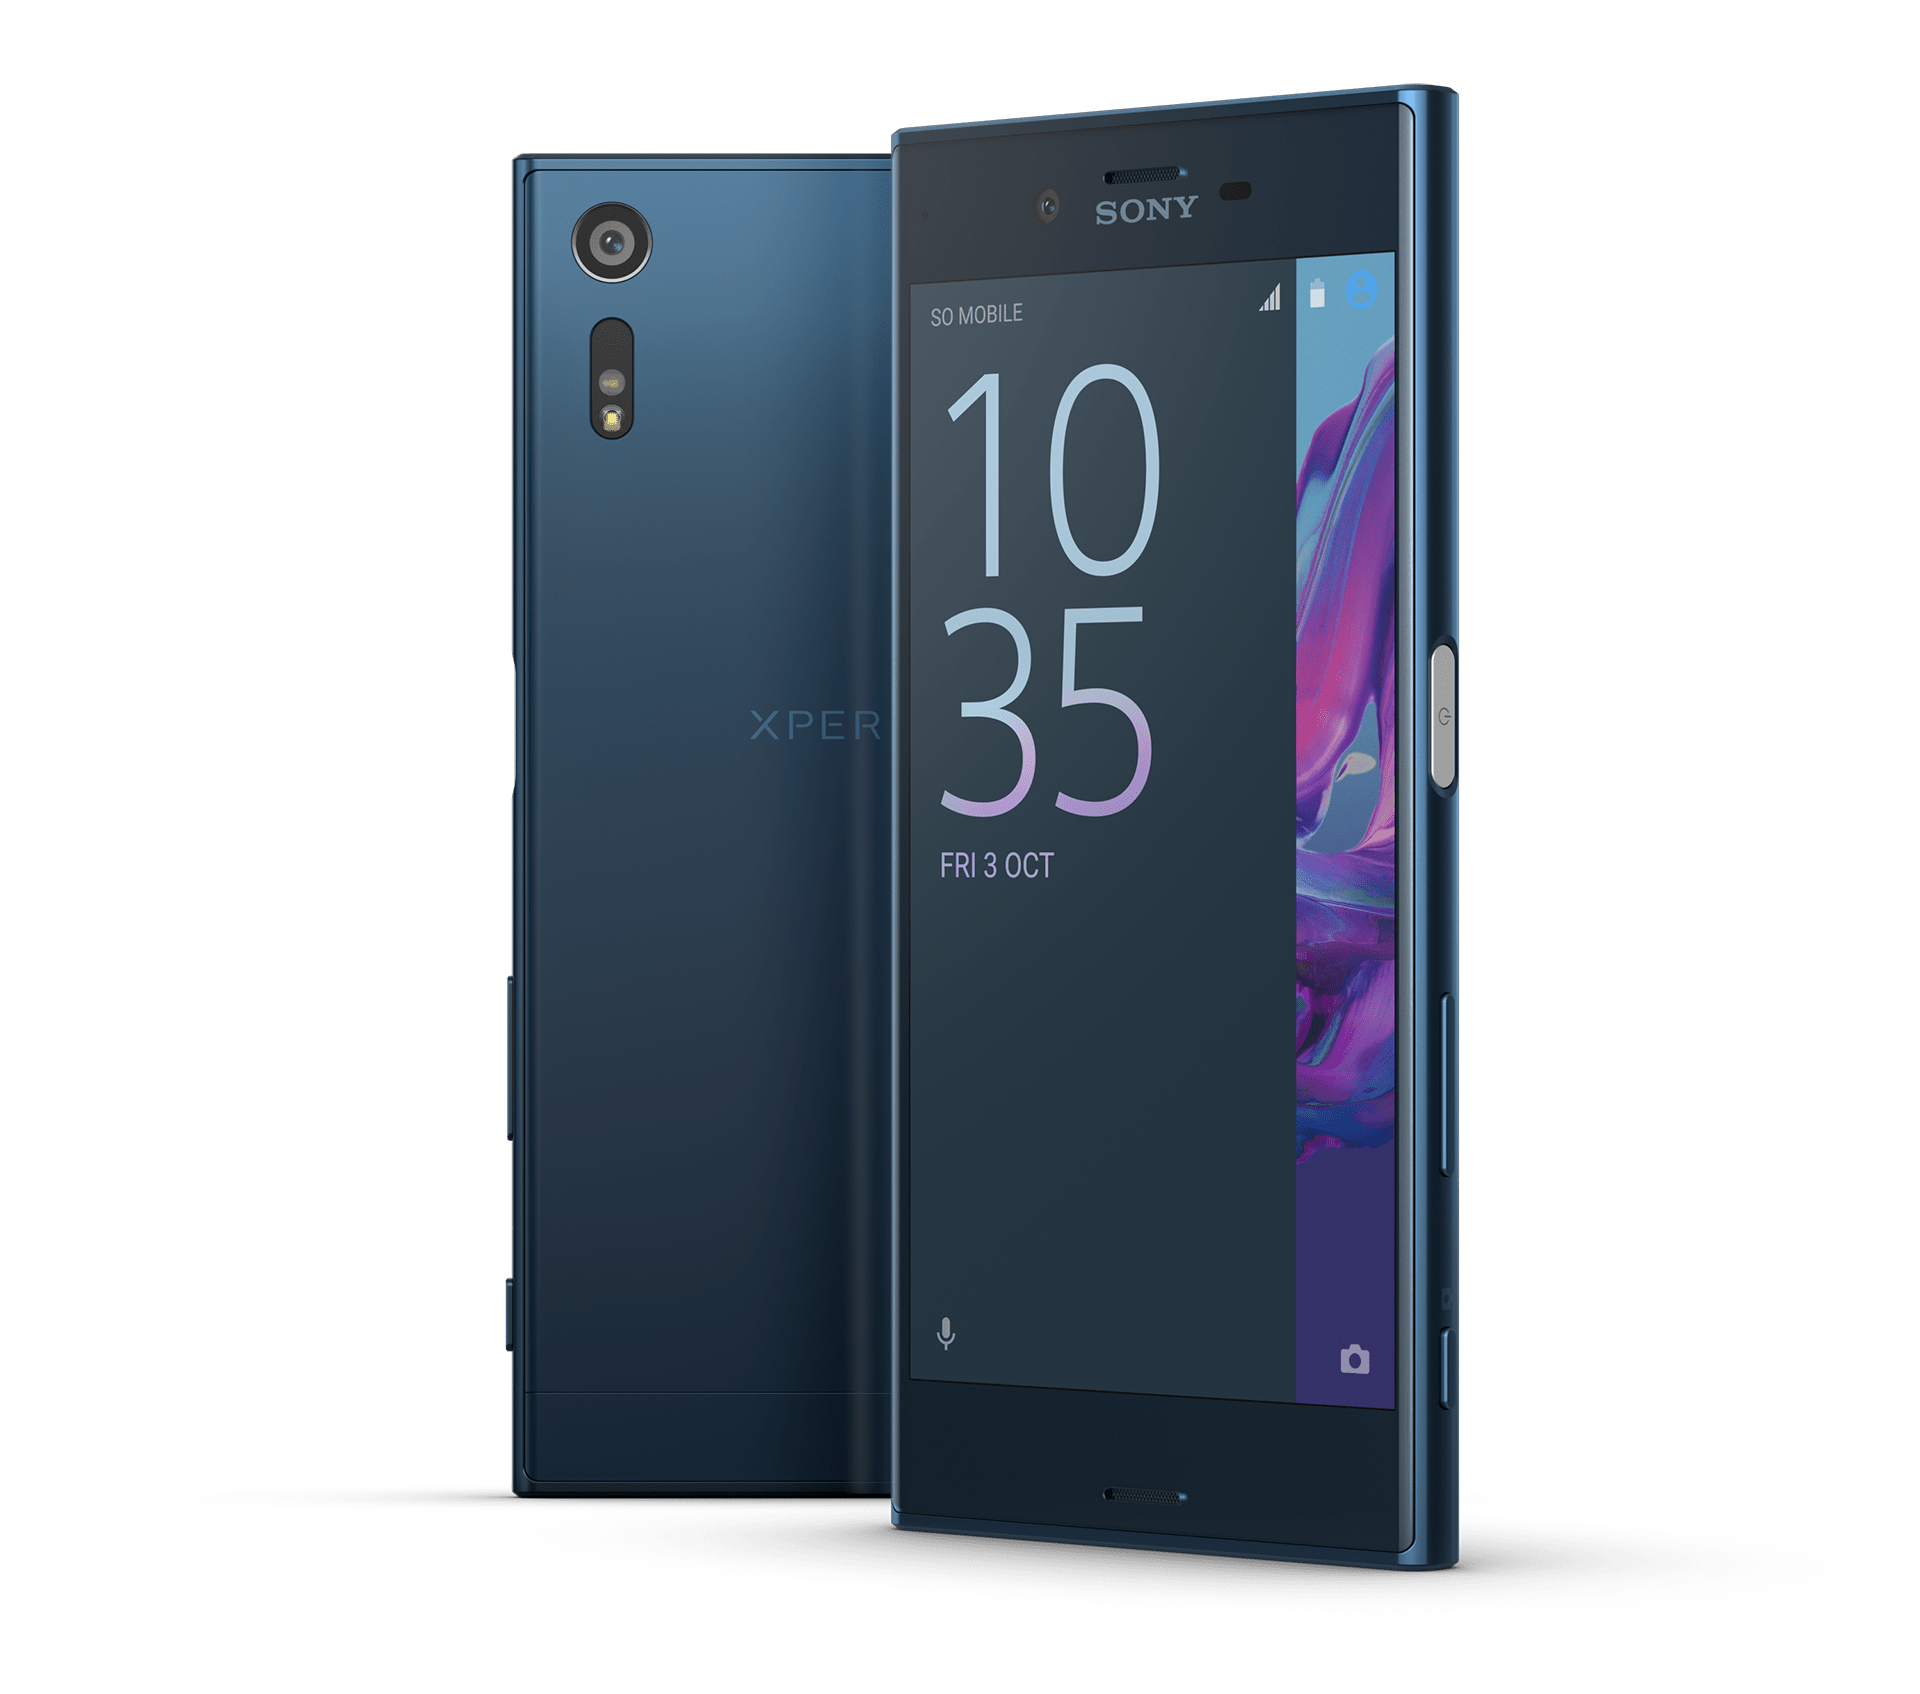 How to Downgrade Xperia XZ to Android 6.0.1 Marshmallow Official Firmware 1